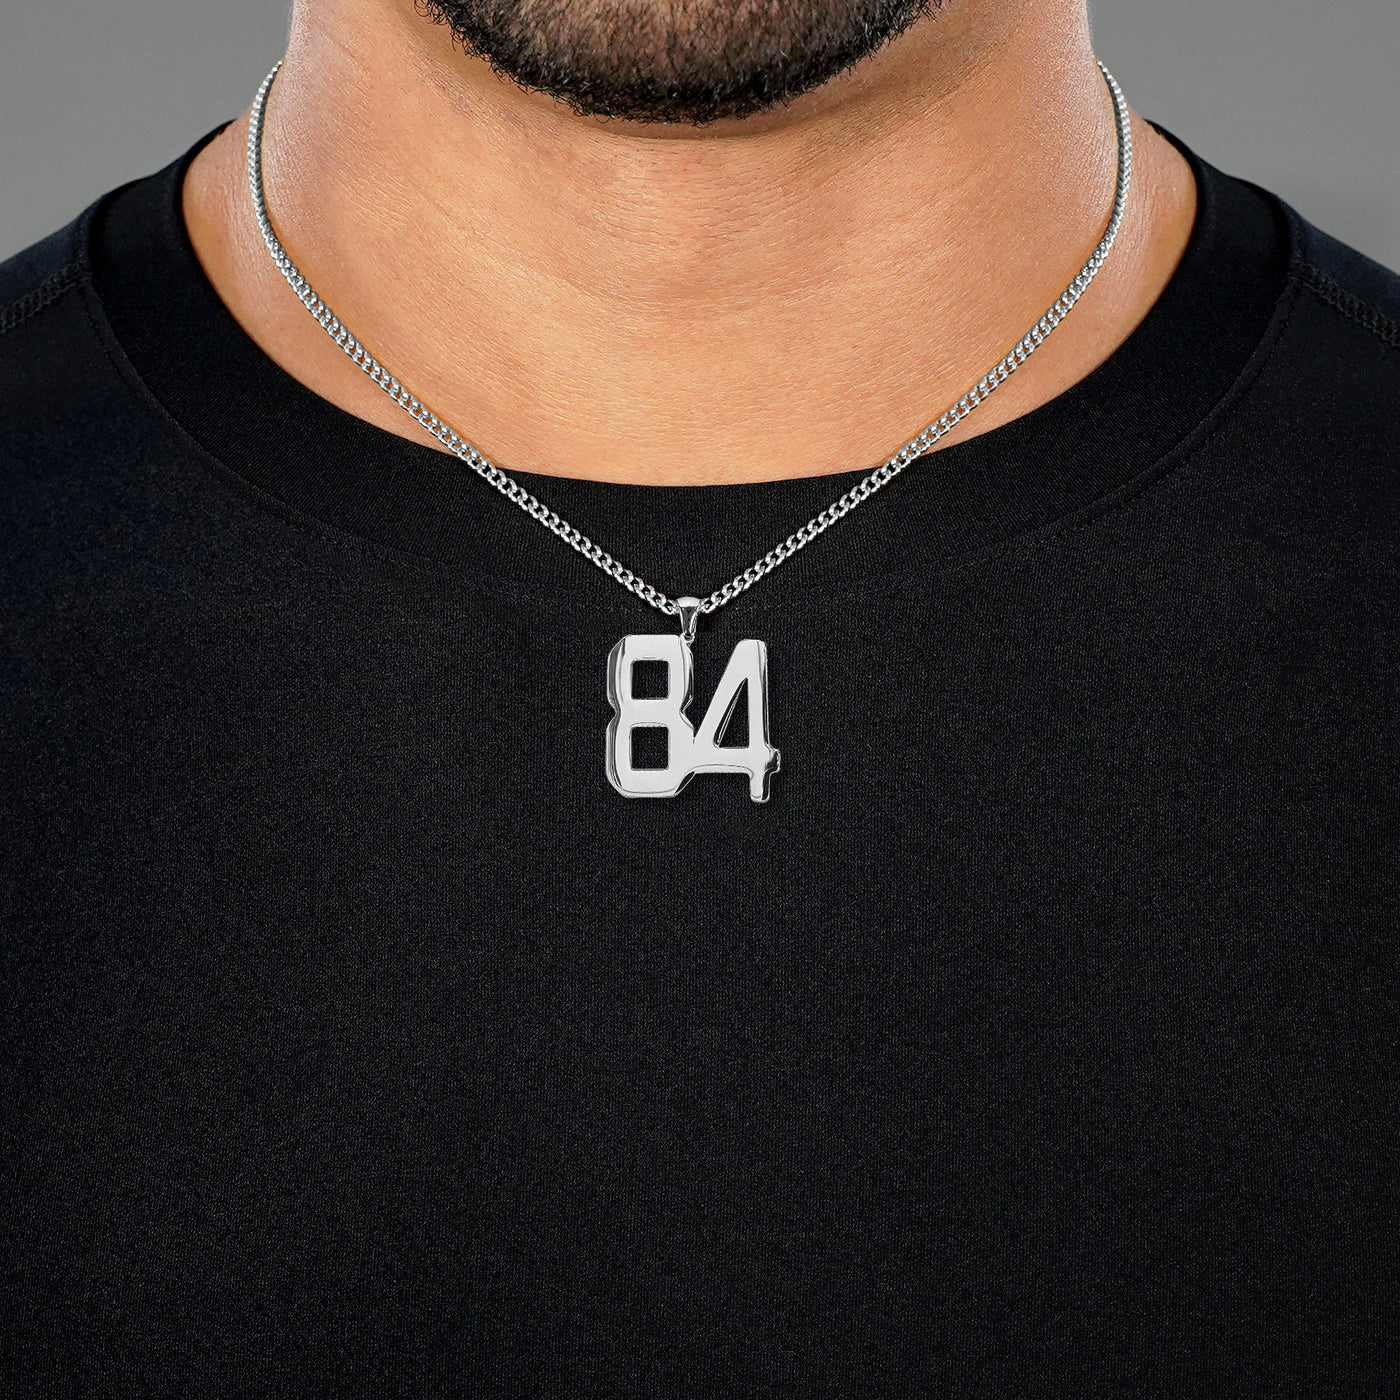 84 Number Pendant with Chain Necklace - Stainless Steel